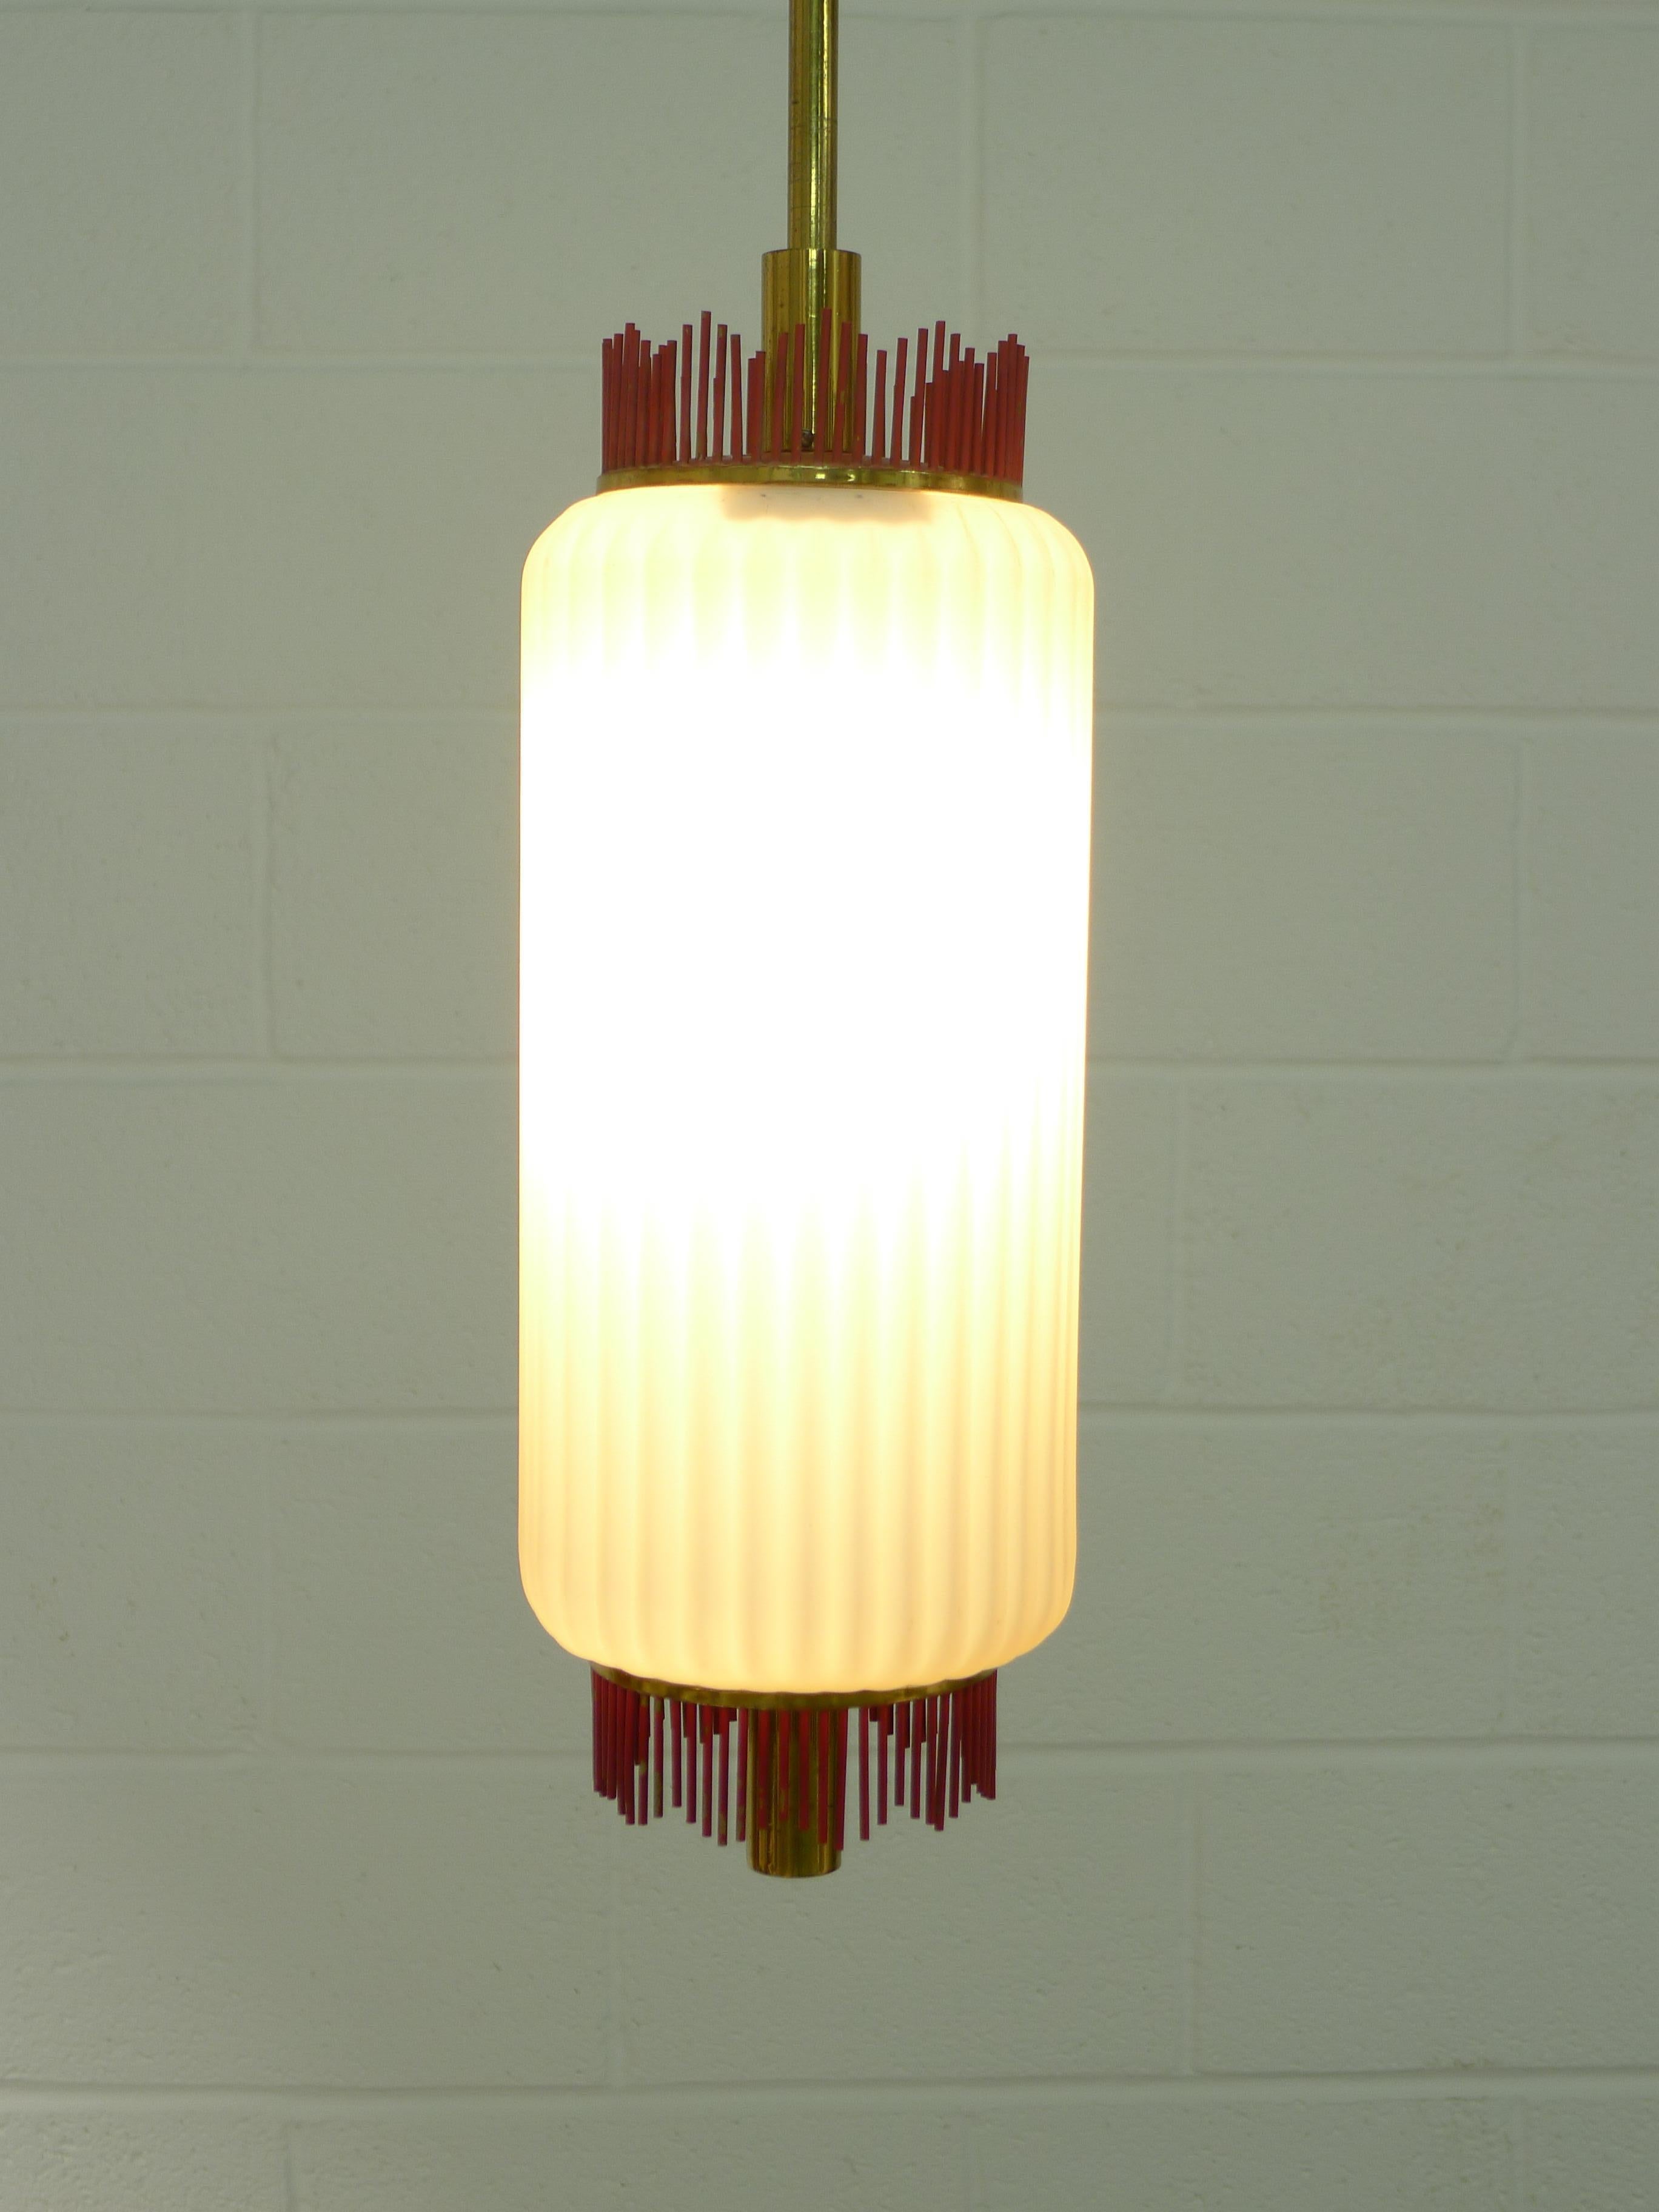 Angello Lelli for Arredoluce, circa late 1950s early 1960s. Attribution since this lamp is not documented in the recent book but bears all the hallmarks/quality of Arredoluce production and uses the same scalloped glass shade as several known